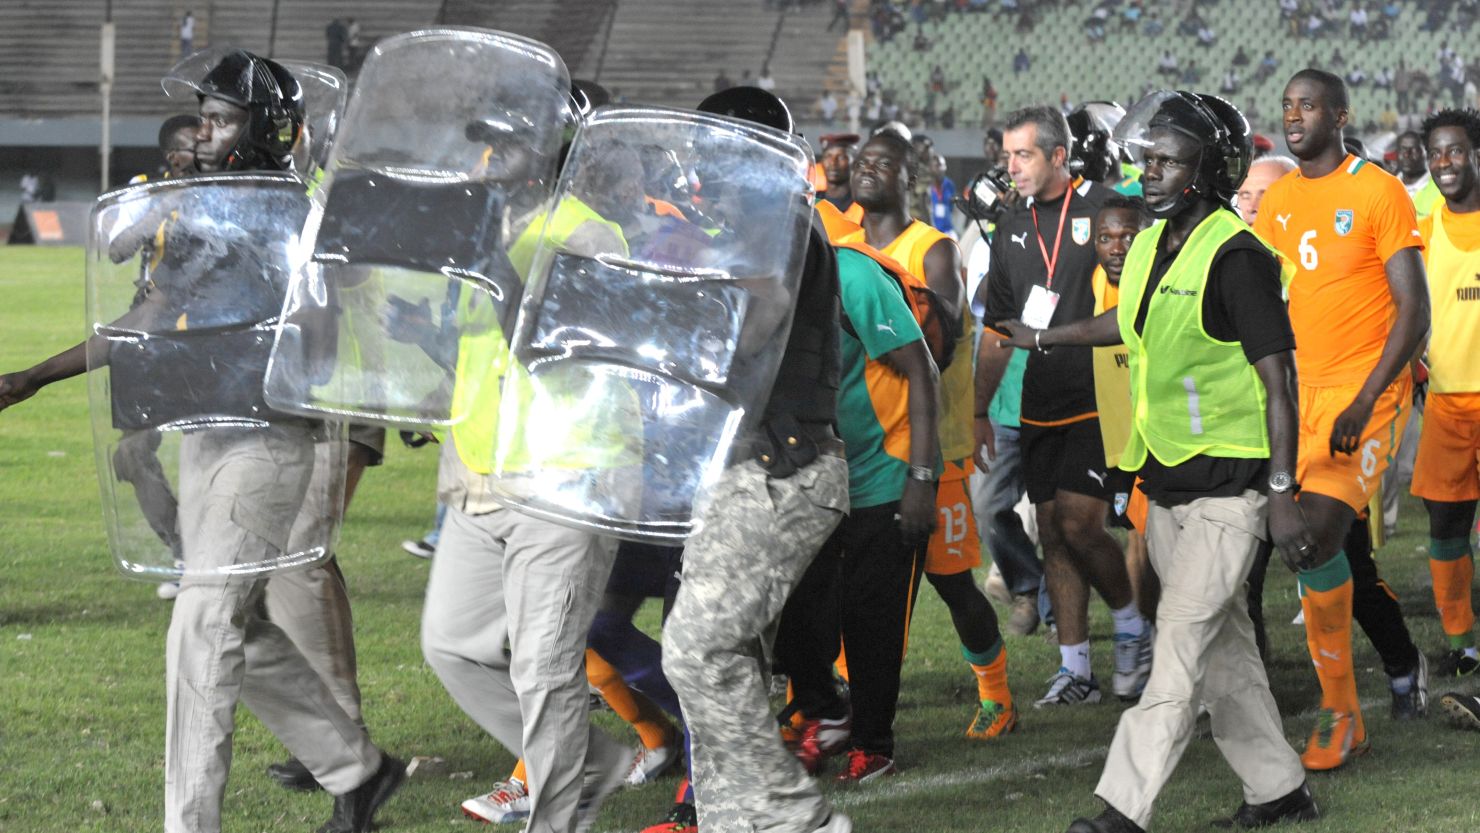 Ivory Coast's players are taken off the field under protection from riot police after the match against Senegal was abandoned.